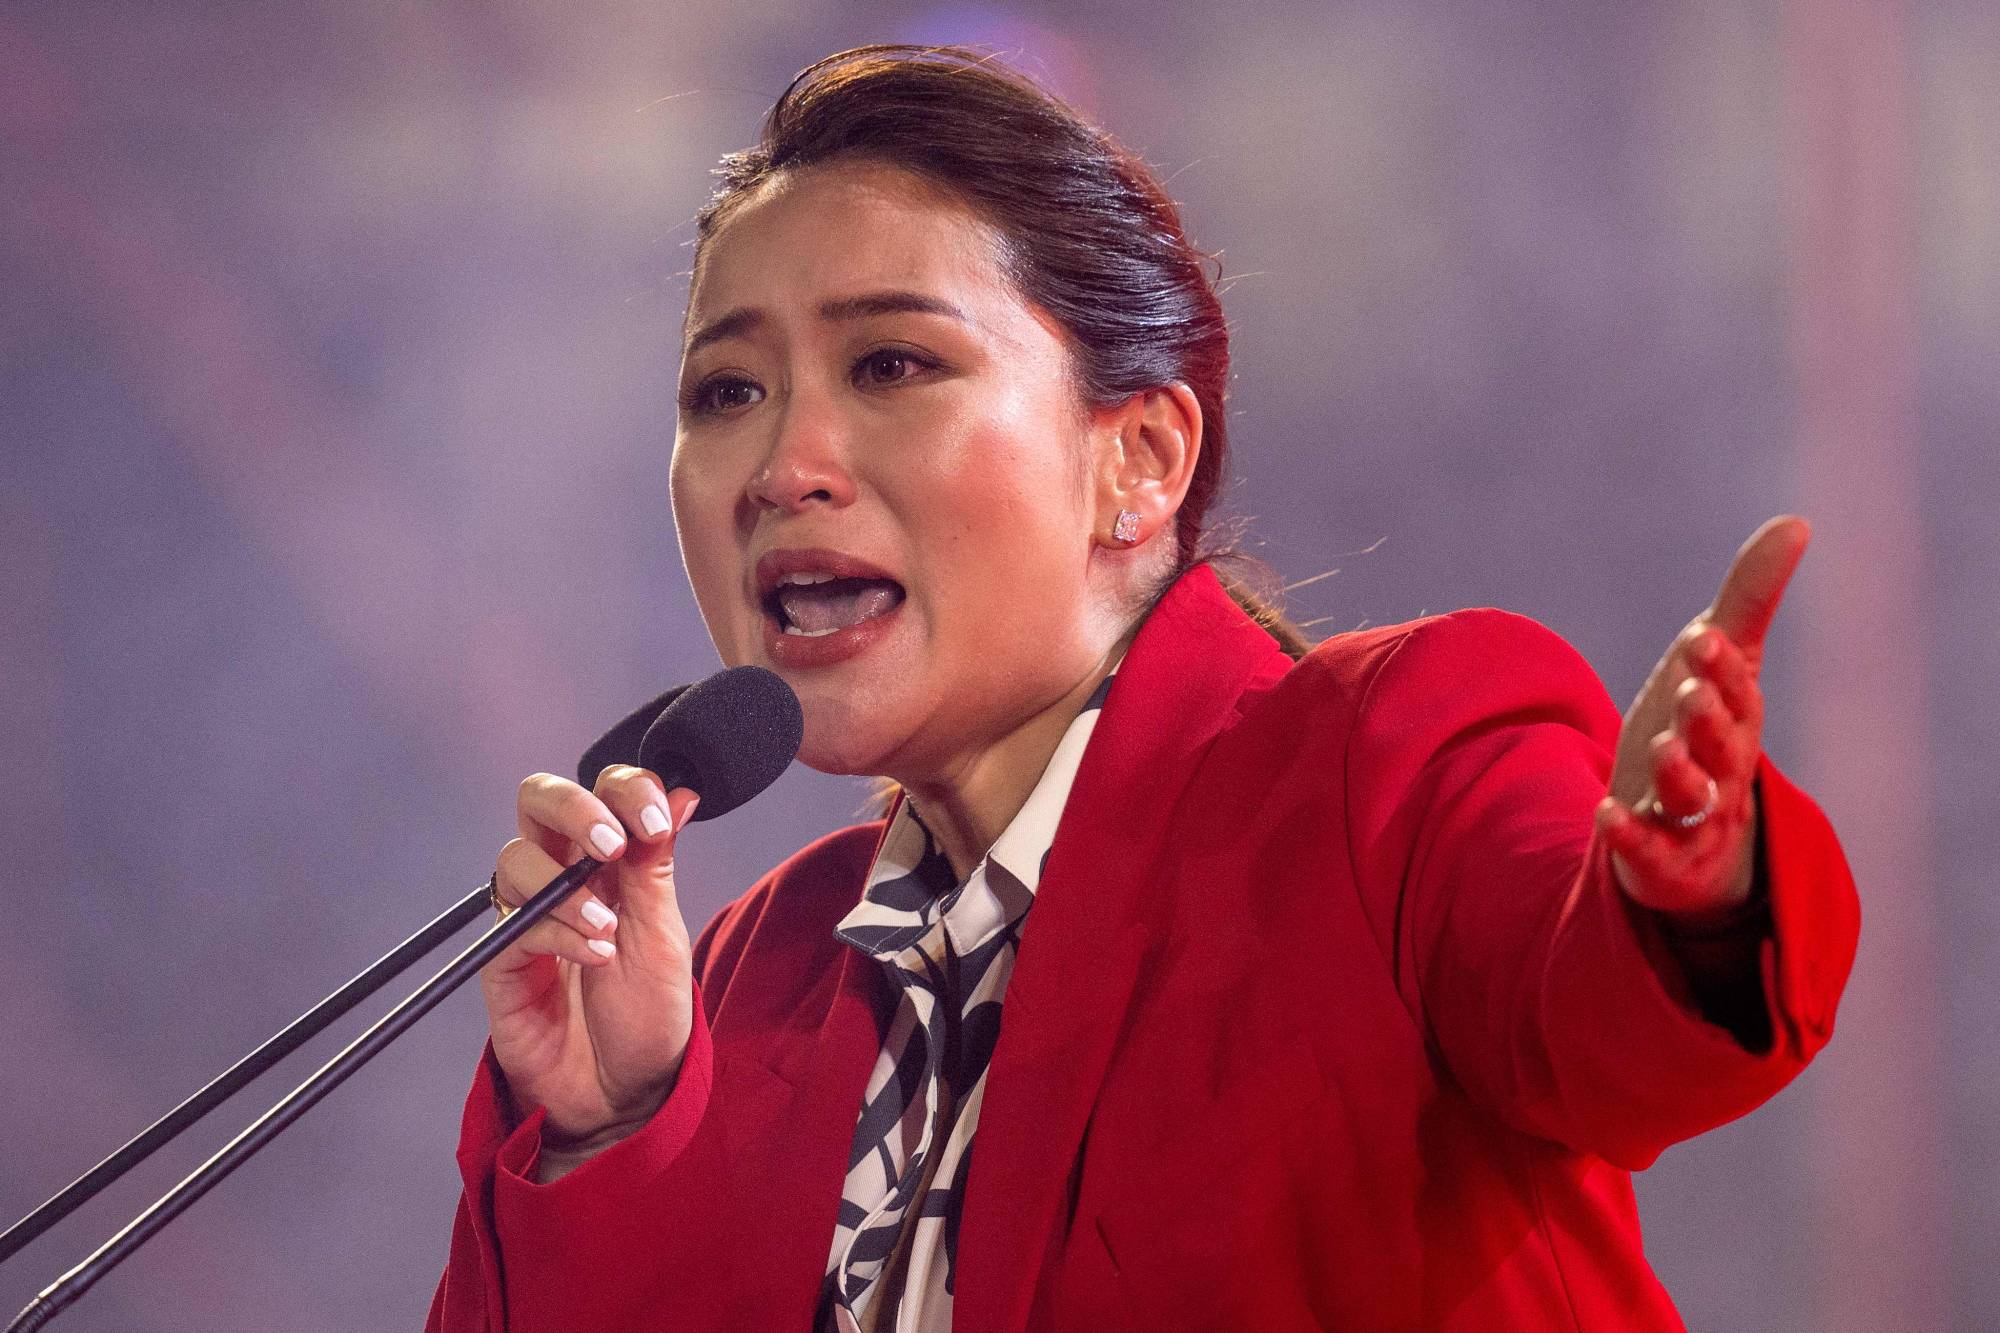 Thai candidate for prime minister, Paetongtarn Shinawatra, speaks on stage during an election rally for the main opposition Pheu Thai party in Nonthaburi on April 5. | AFP-JIJI